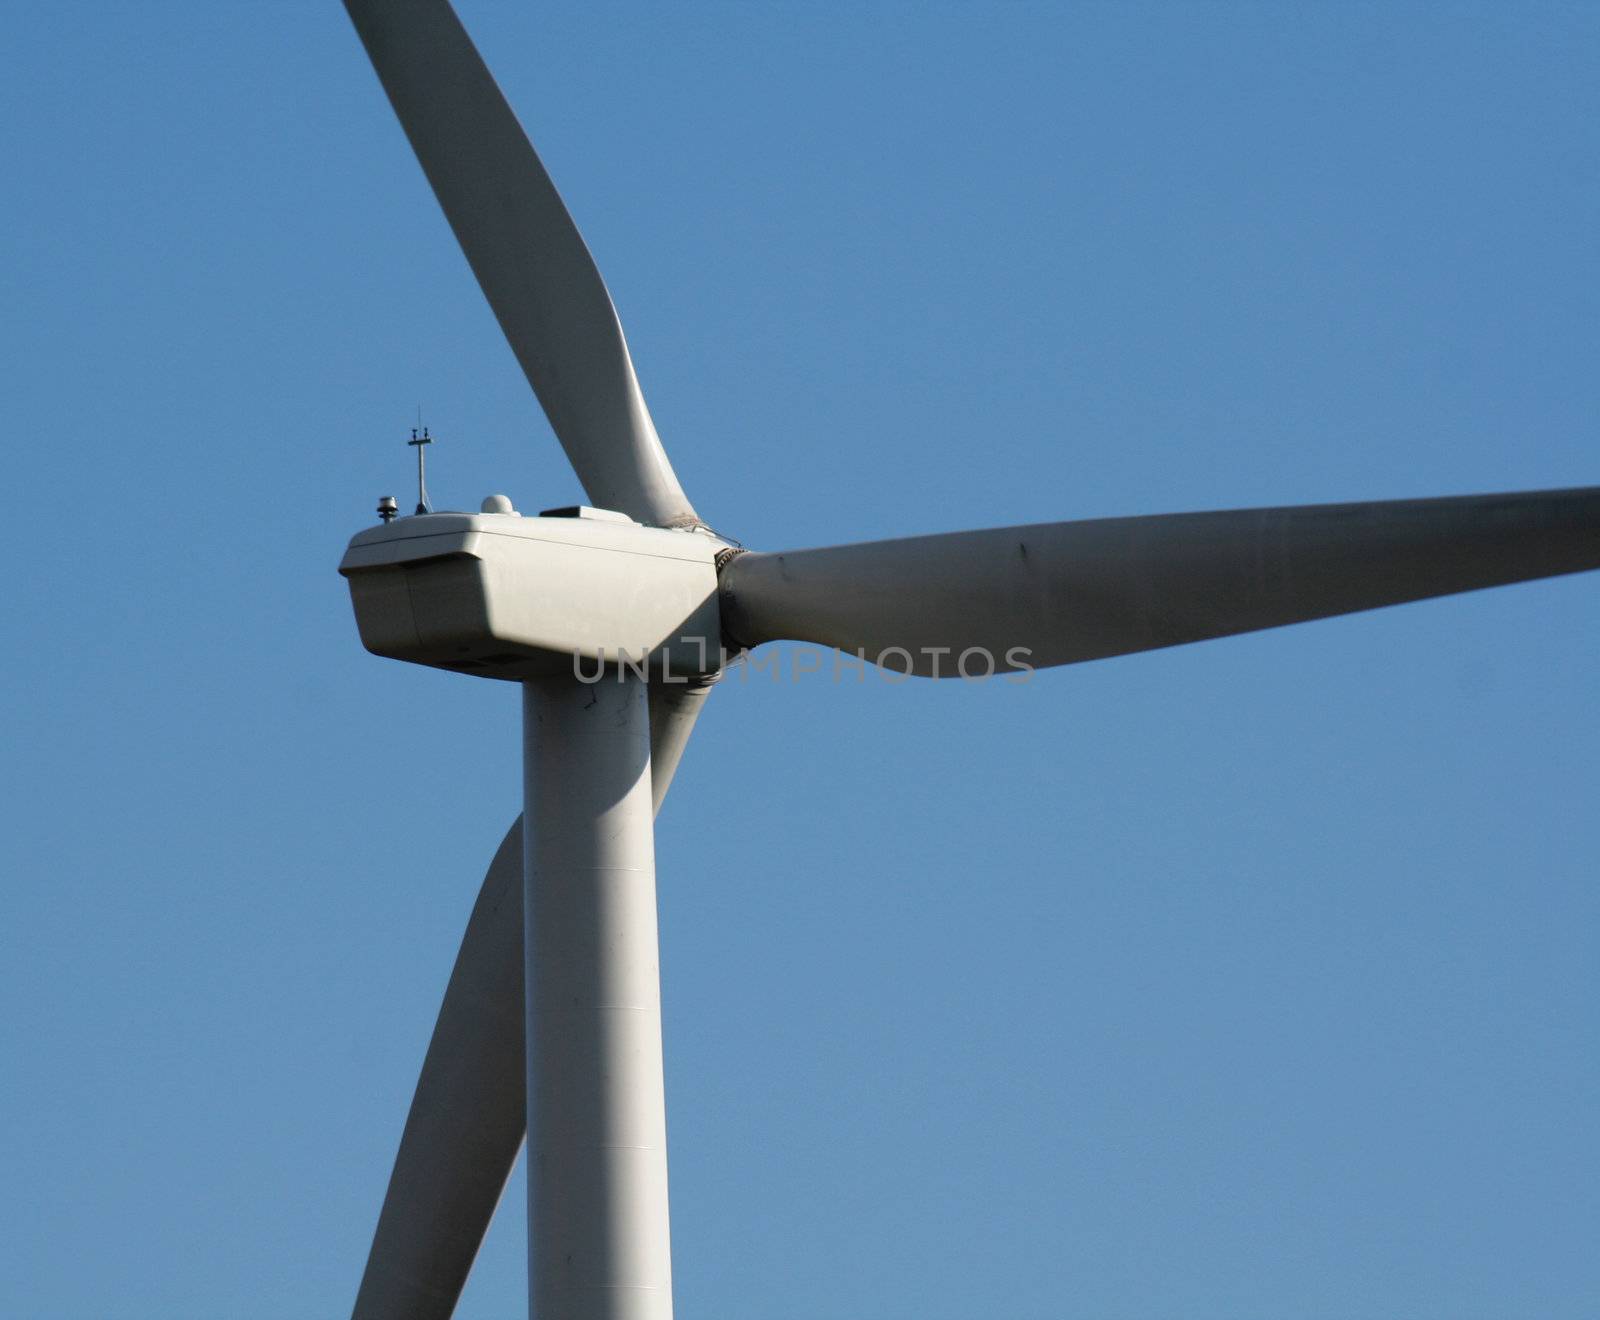 A close up of wind turbine shot from behind against the blue sky.